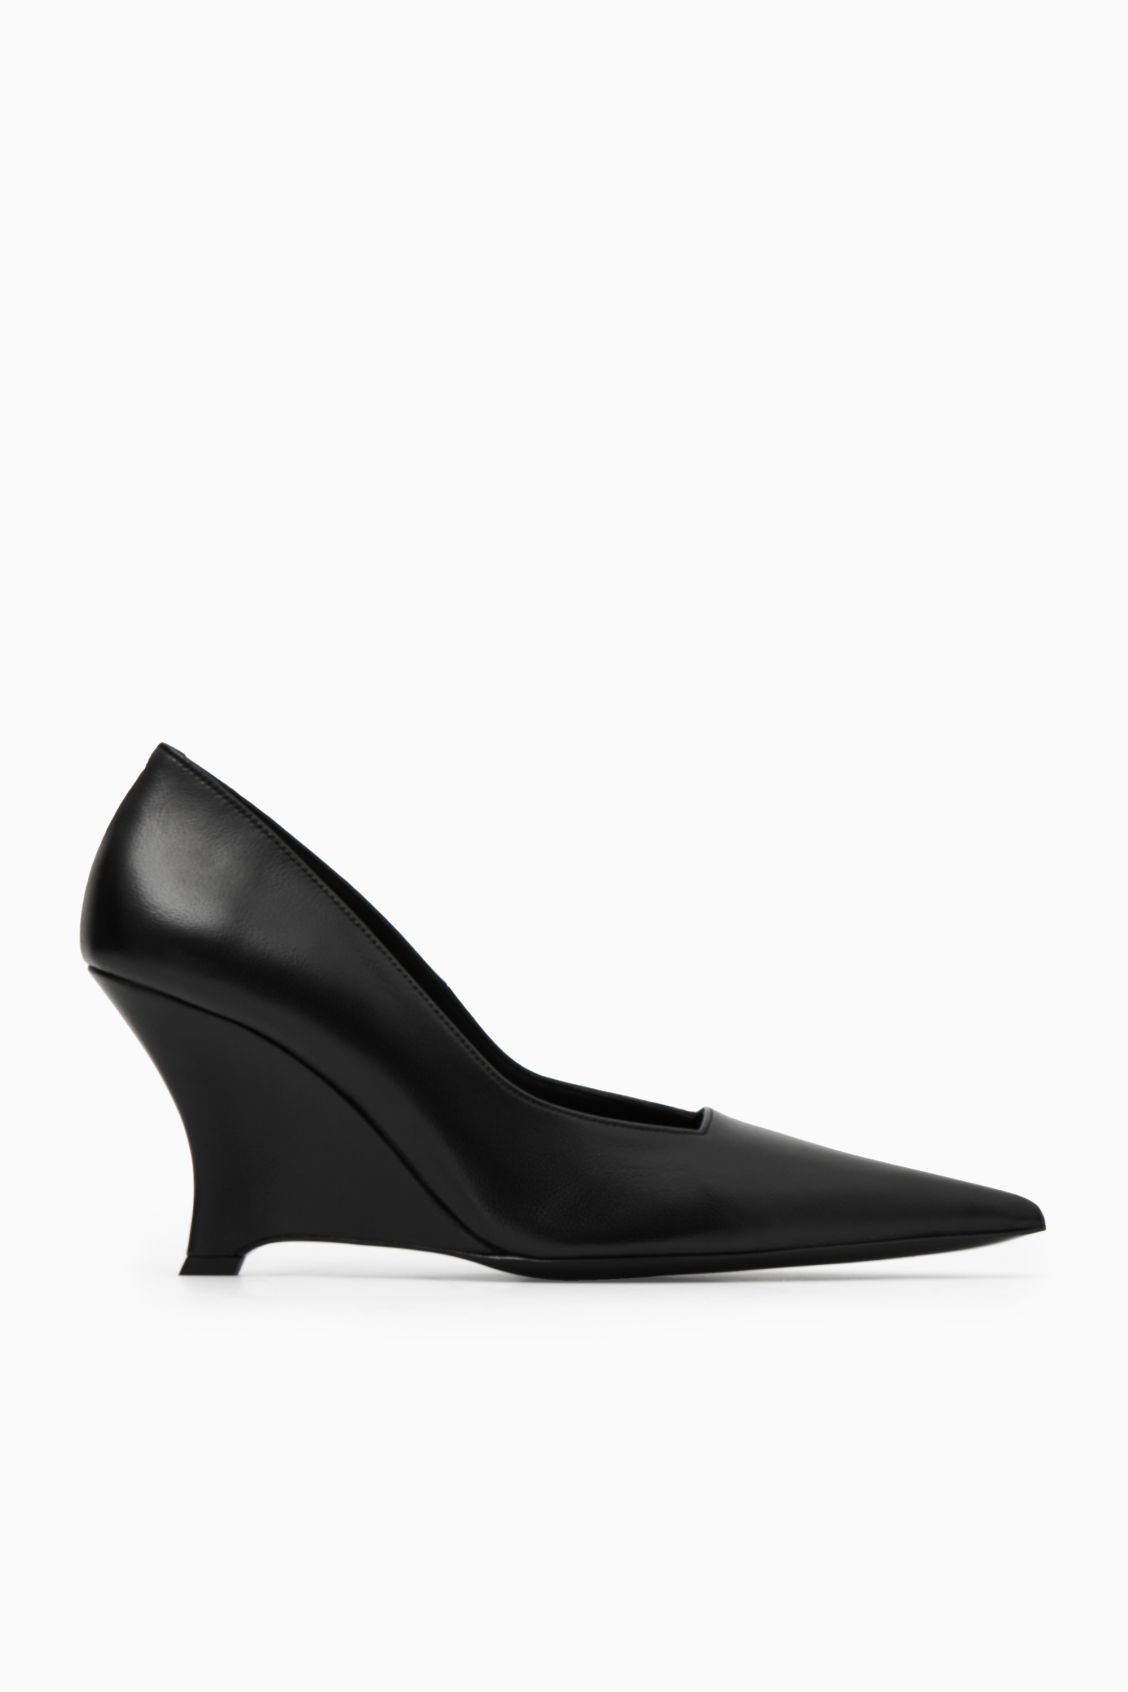 COS Pointed Leather Wedge Pumps | Endource